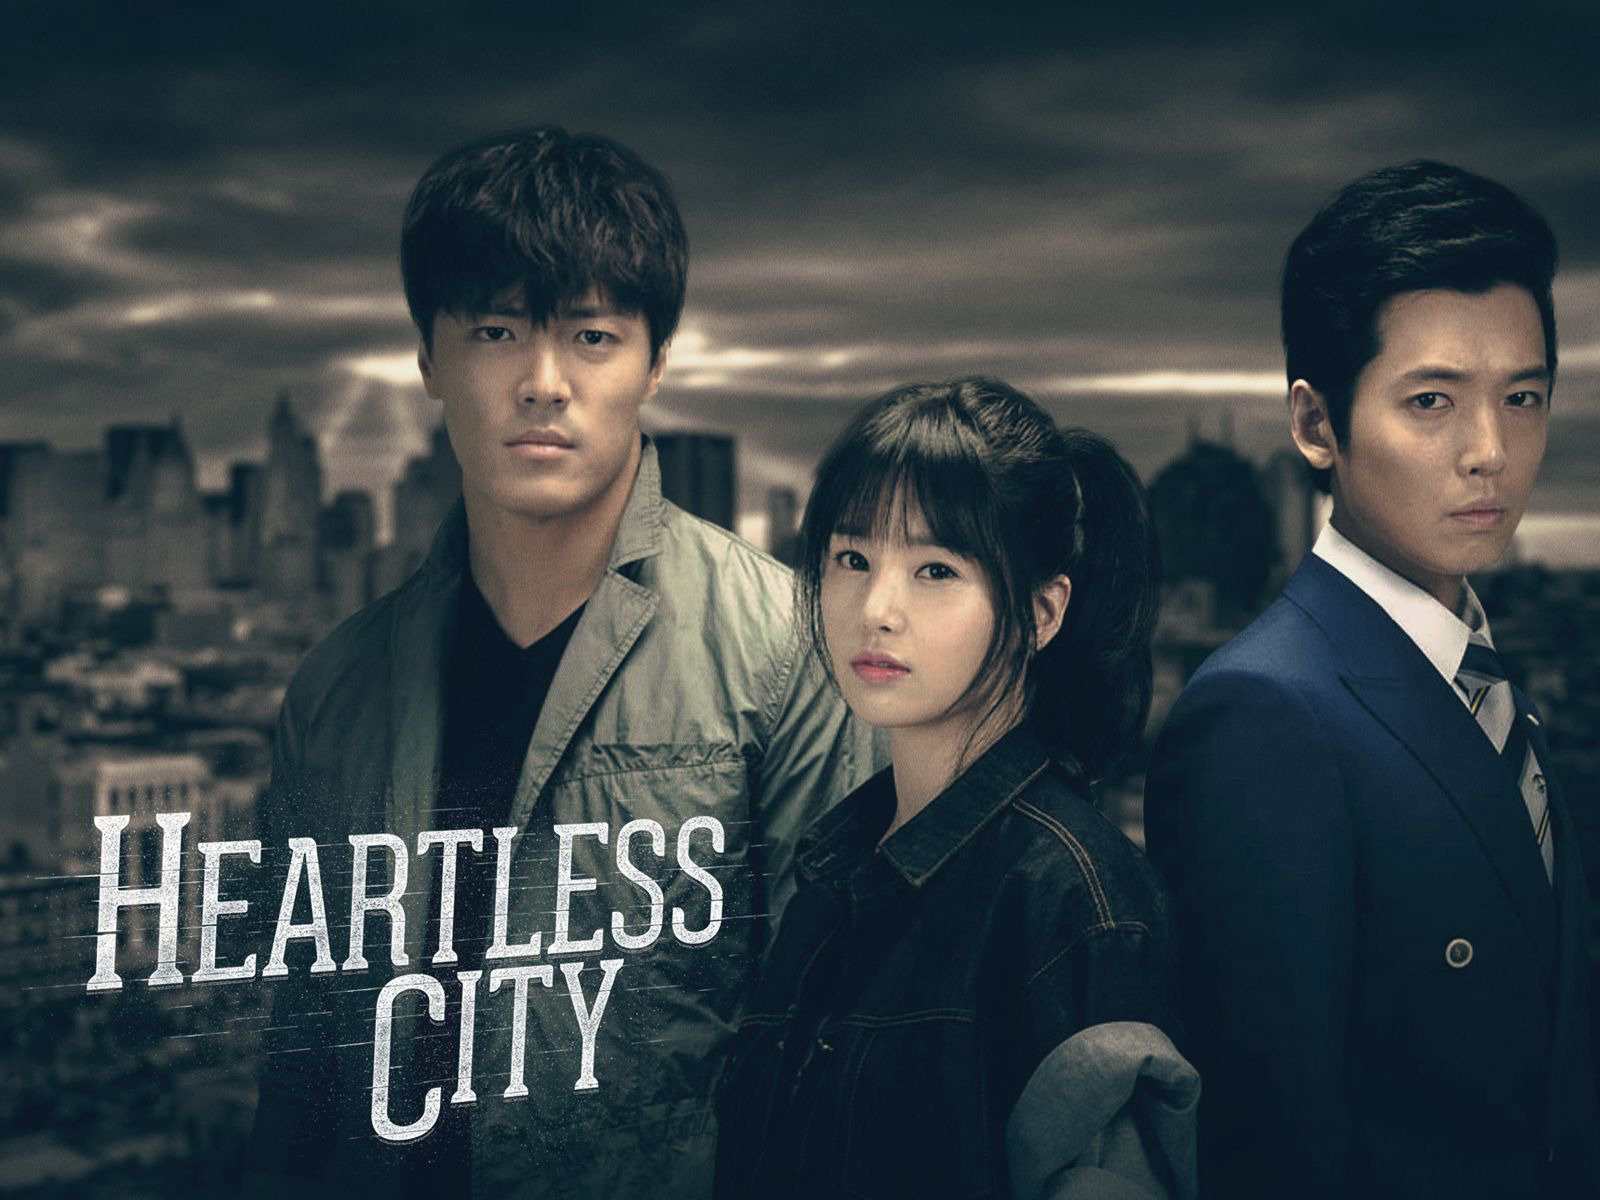 Banner Phim Sống Trong Tội Ác (Heartless City)